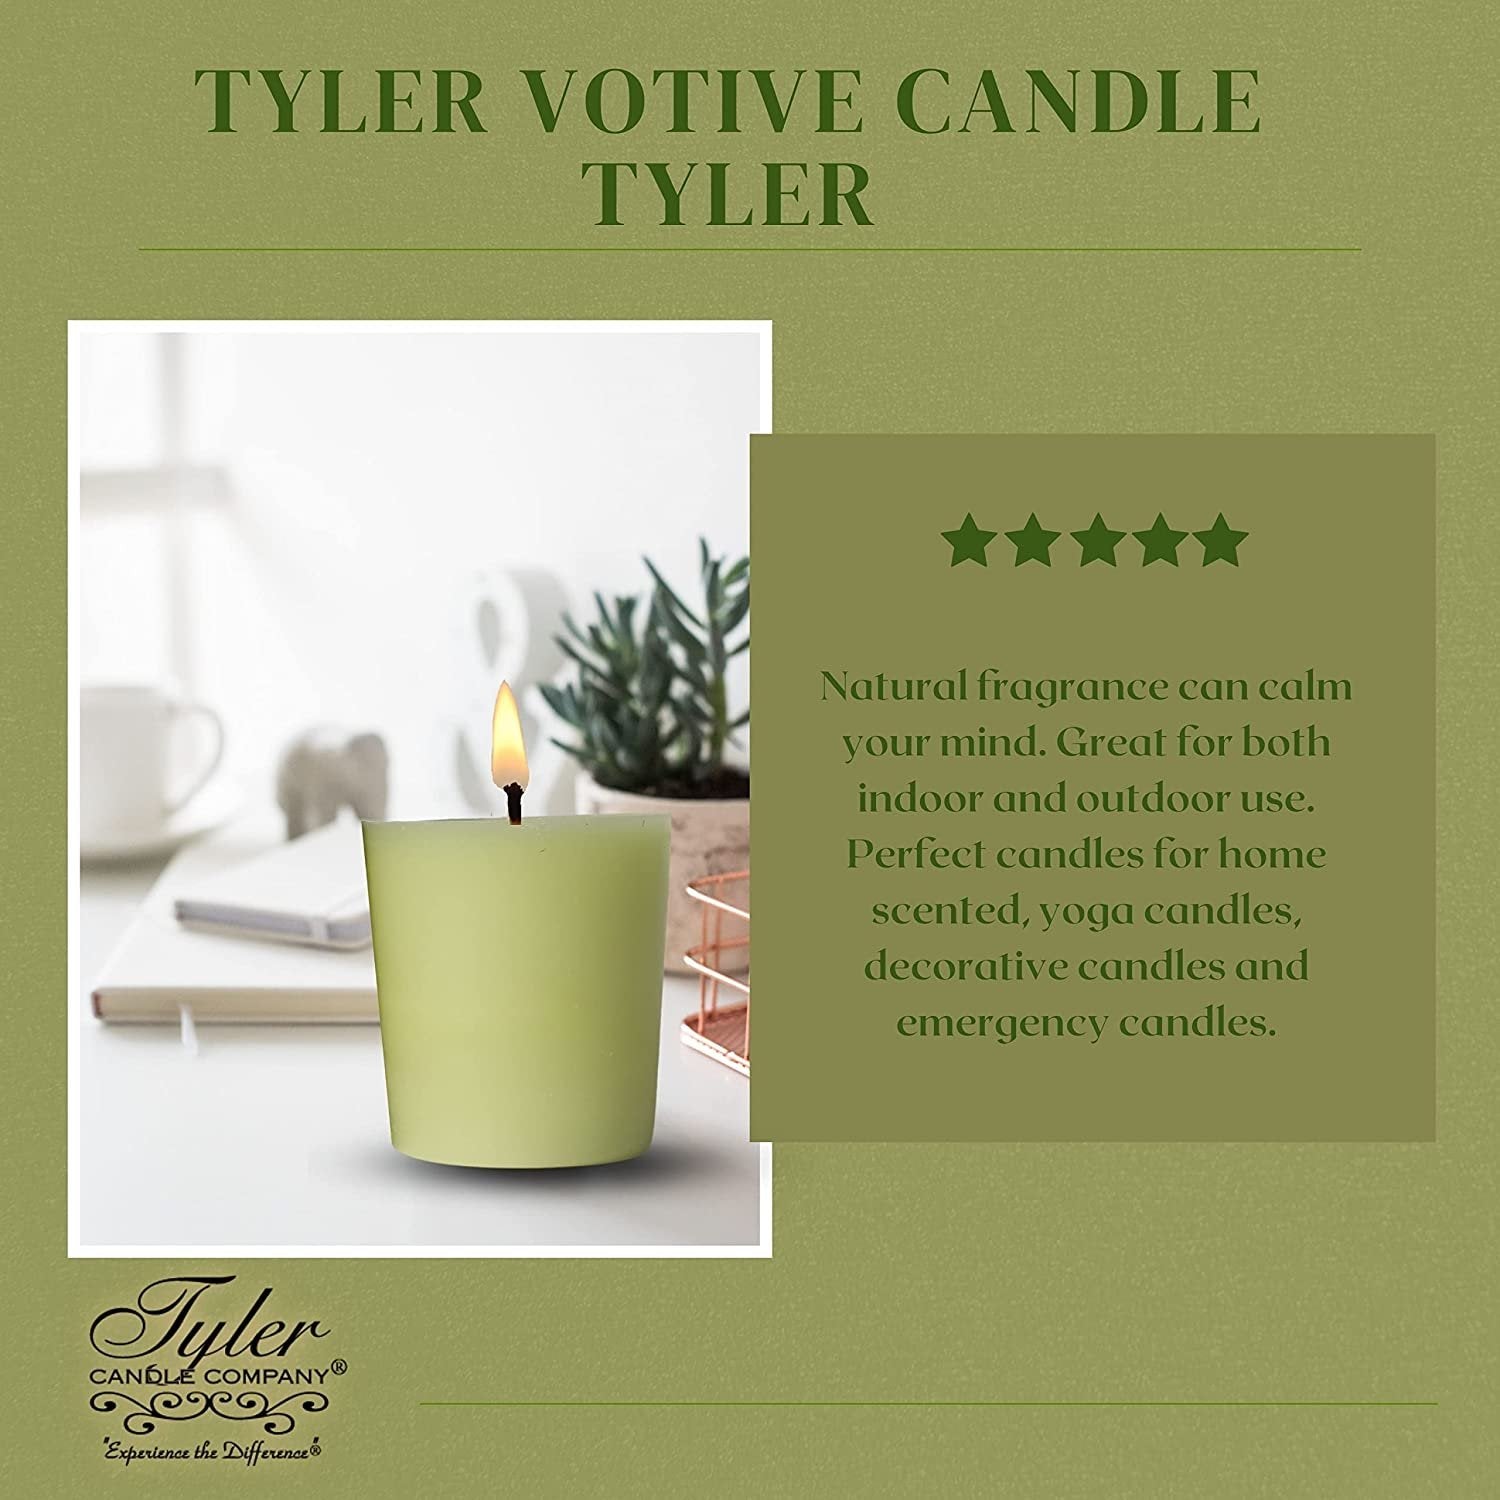 Tyler Candle Company Tyler Scent Votive Candles - Luxury Scented Candle with Essential Oils - 4 Pack of 2 oz Small Candles with 15 Hour Burn Time Each - with Bonus Key Chain